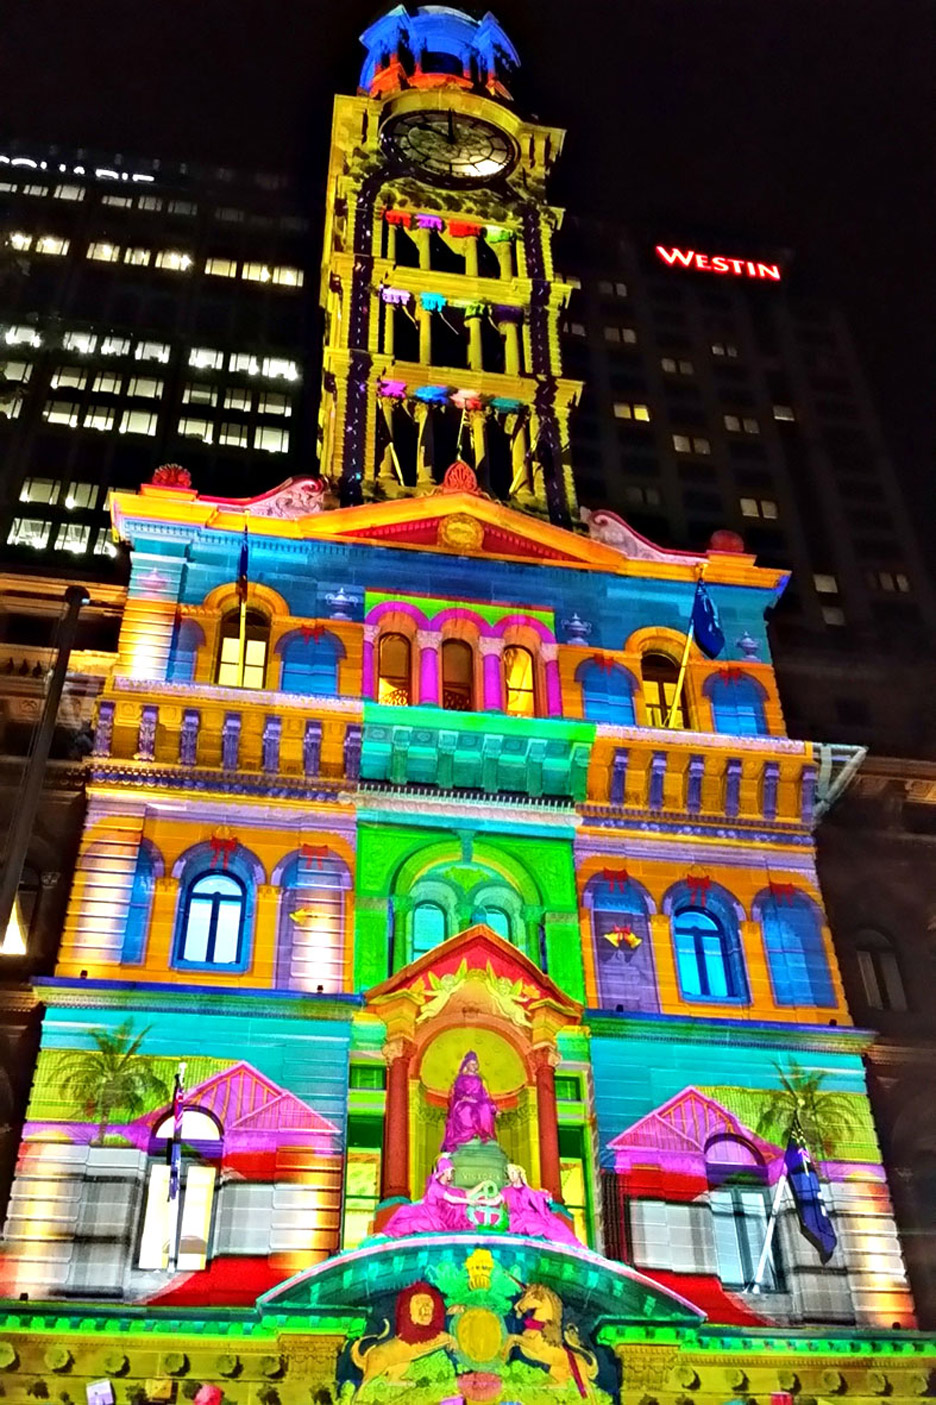 The City of Sydney Christmas decorations